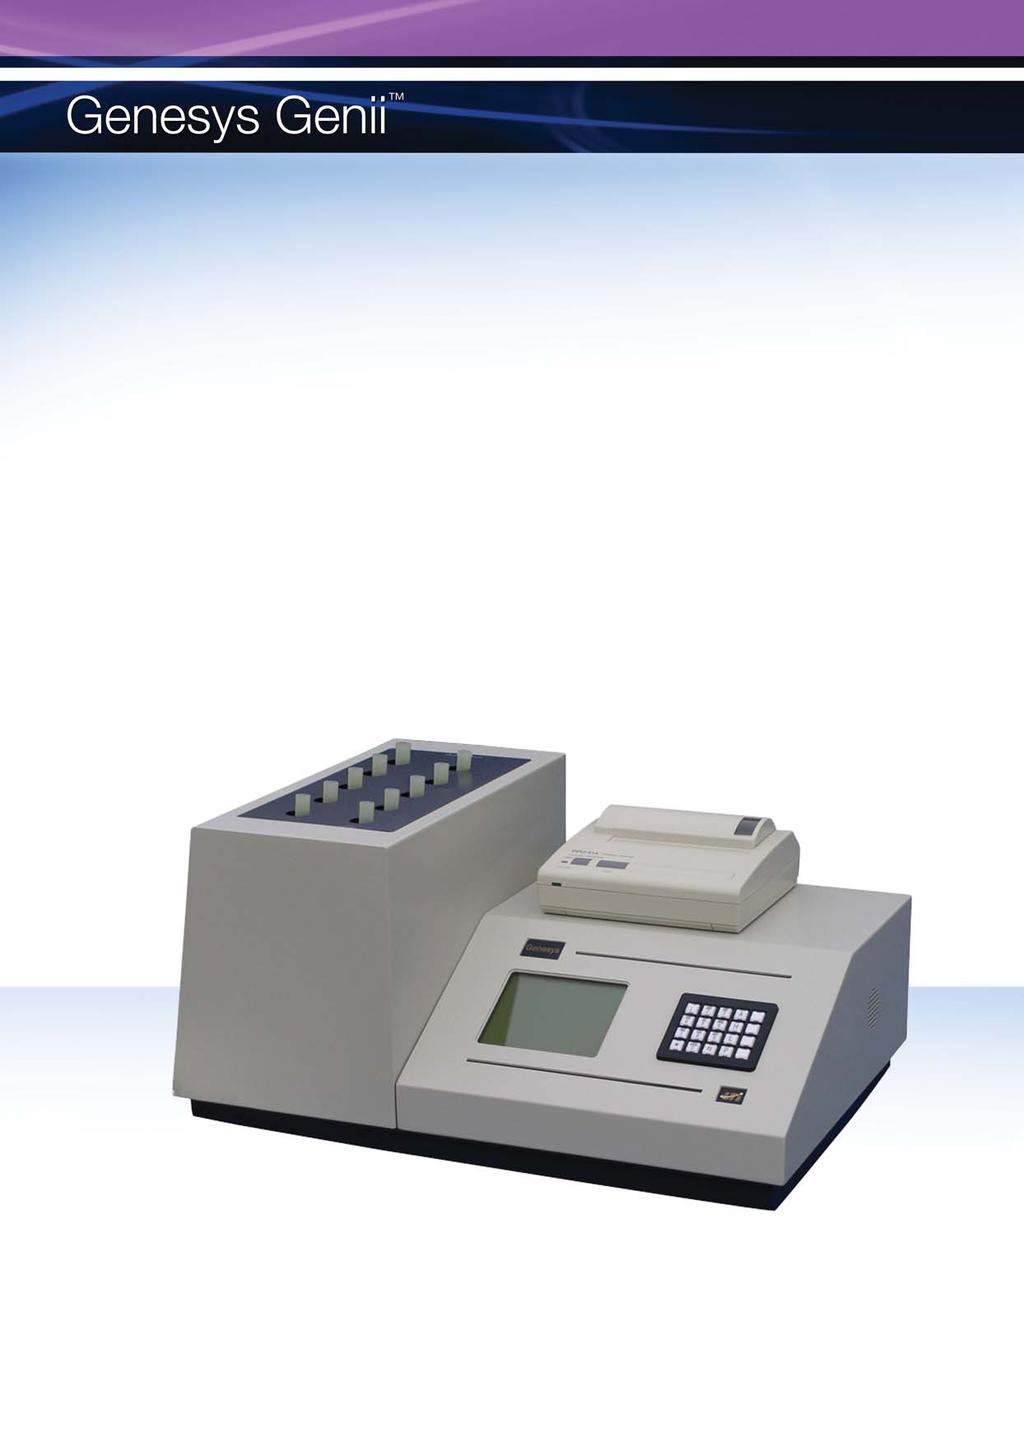 Multi-Detector Gamma Counters High performance gamma counters for RIA and research applications Complete data reduction for all RIA, IRMA, Radio and Research assays Selectable dual label counting